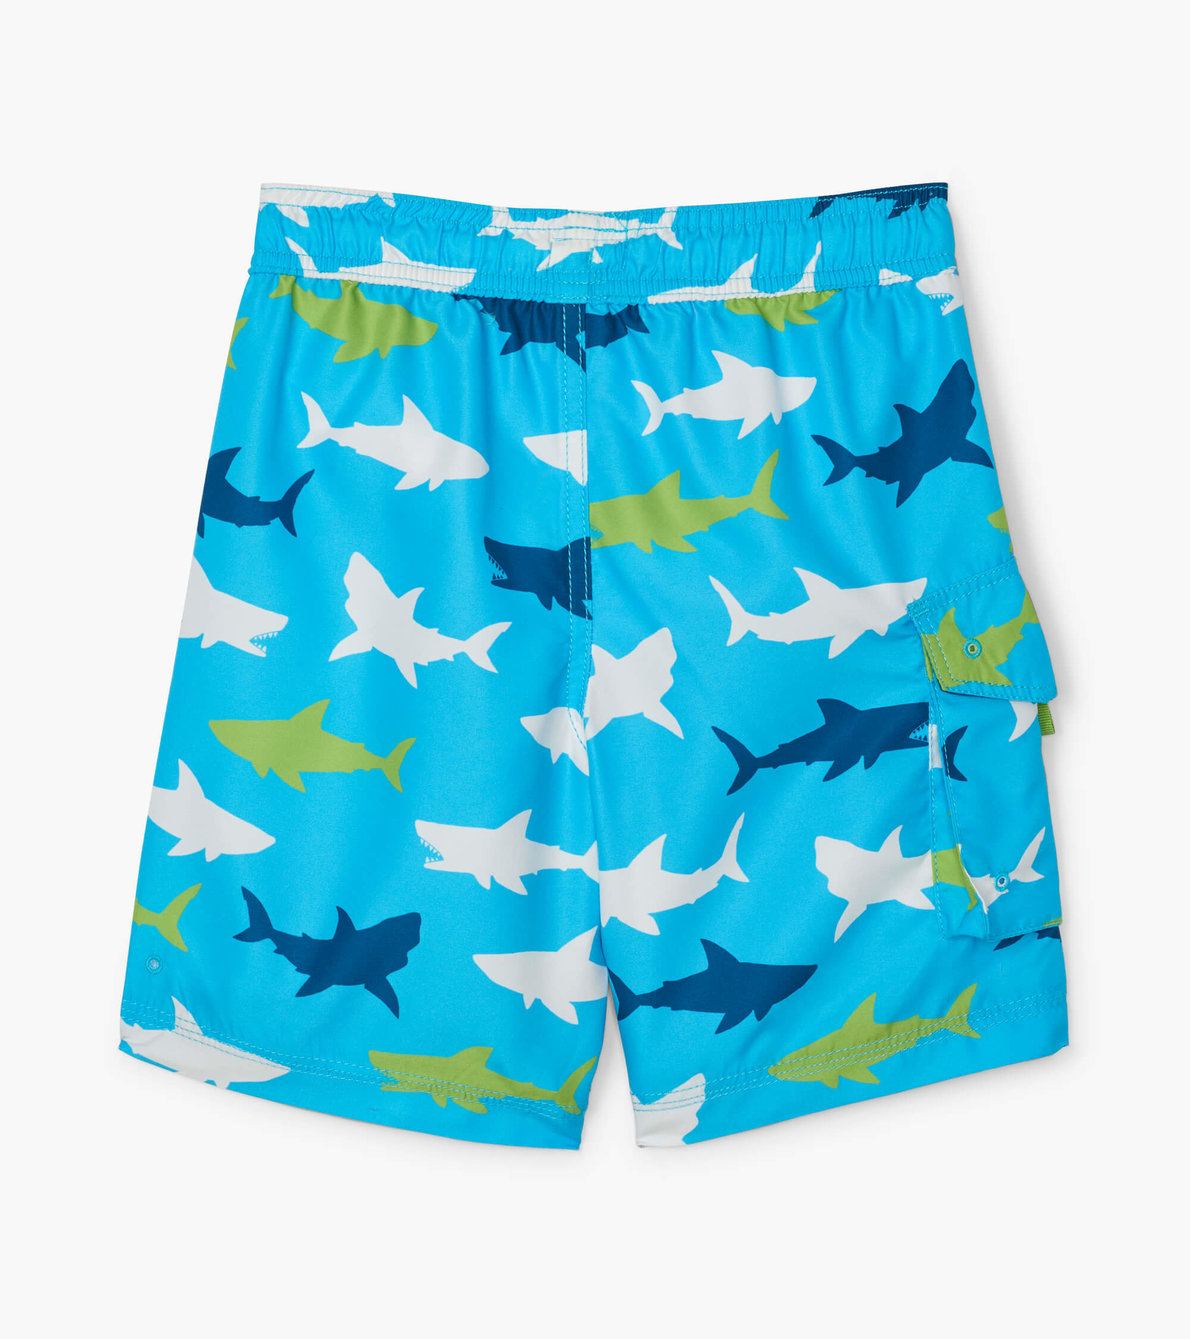 View larger image of Great White Sharks Swim Trunks